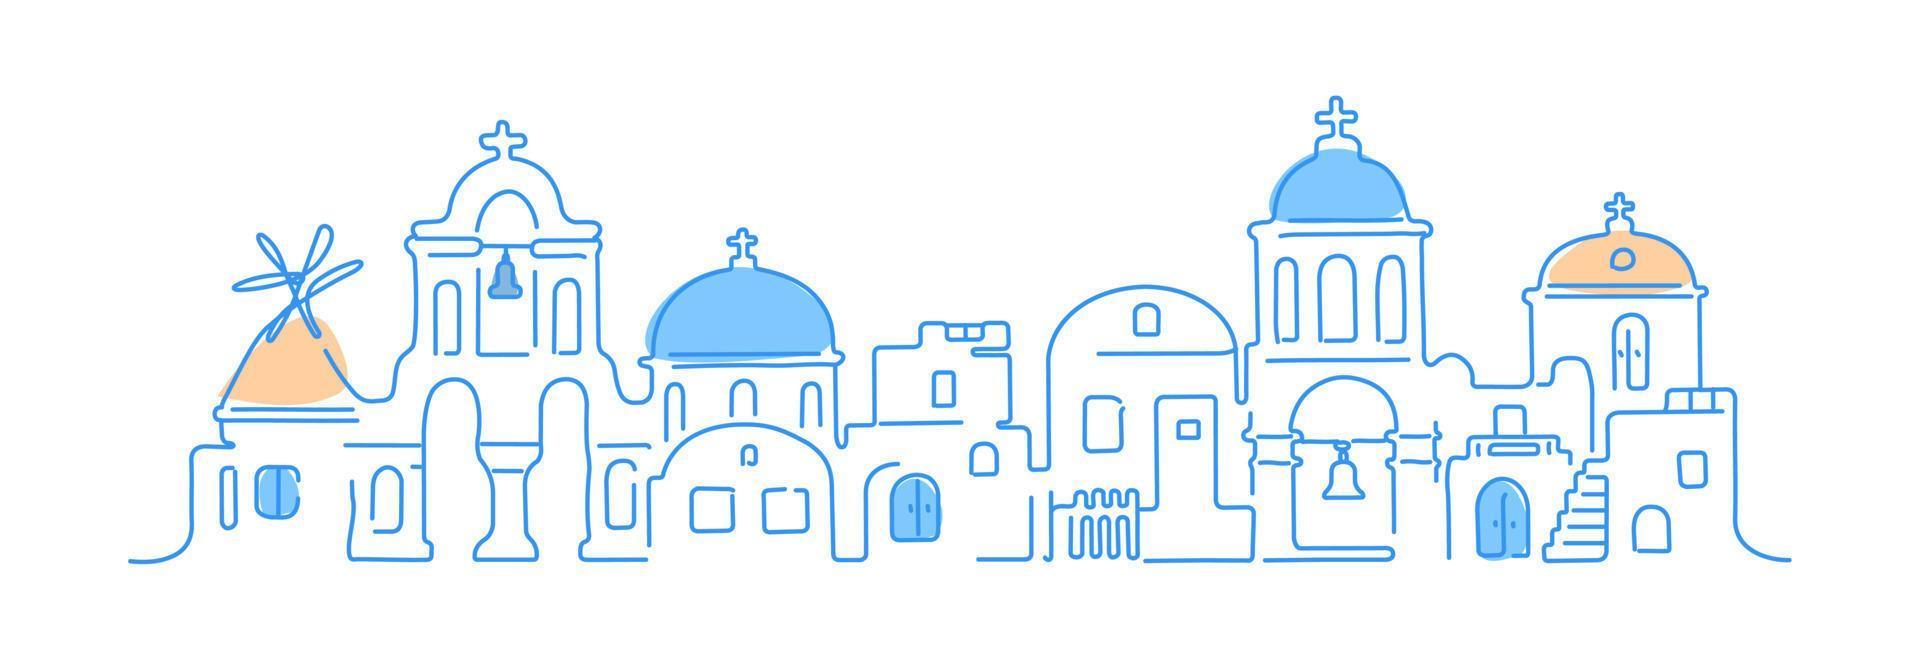 Santorini island, Greece. Traditional white architecture and Greek Orthodox churches with blue domes and a windmill. Vector linear illustration.